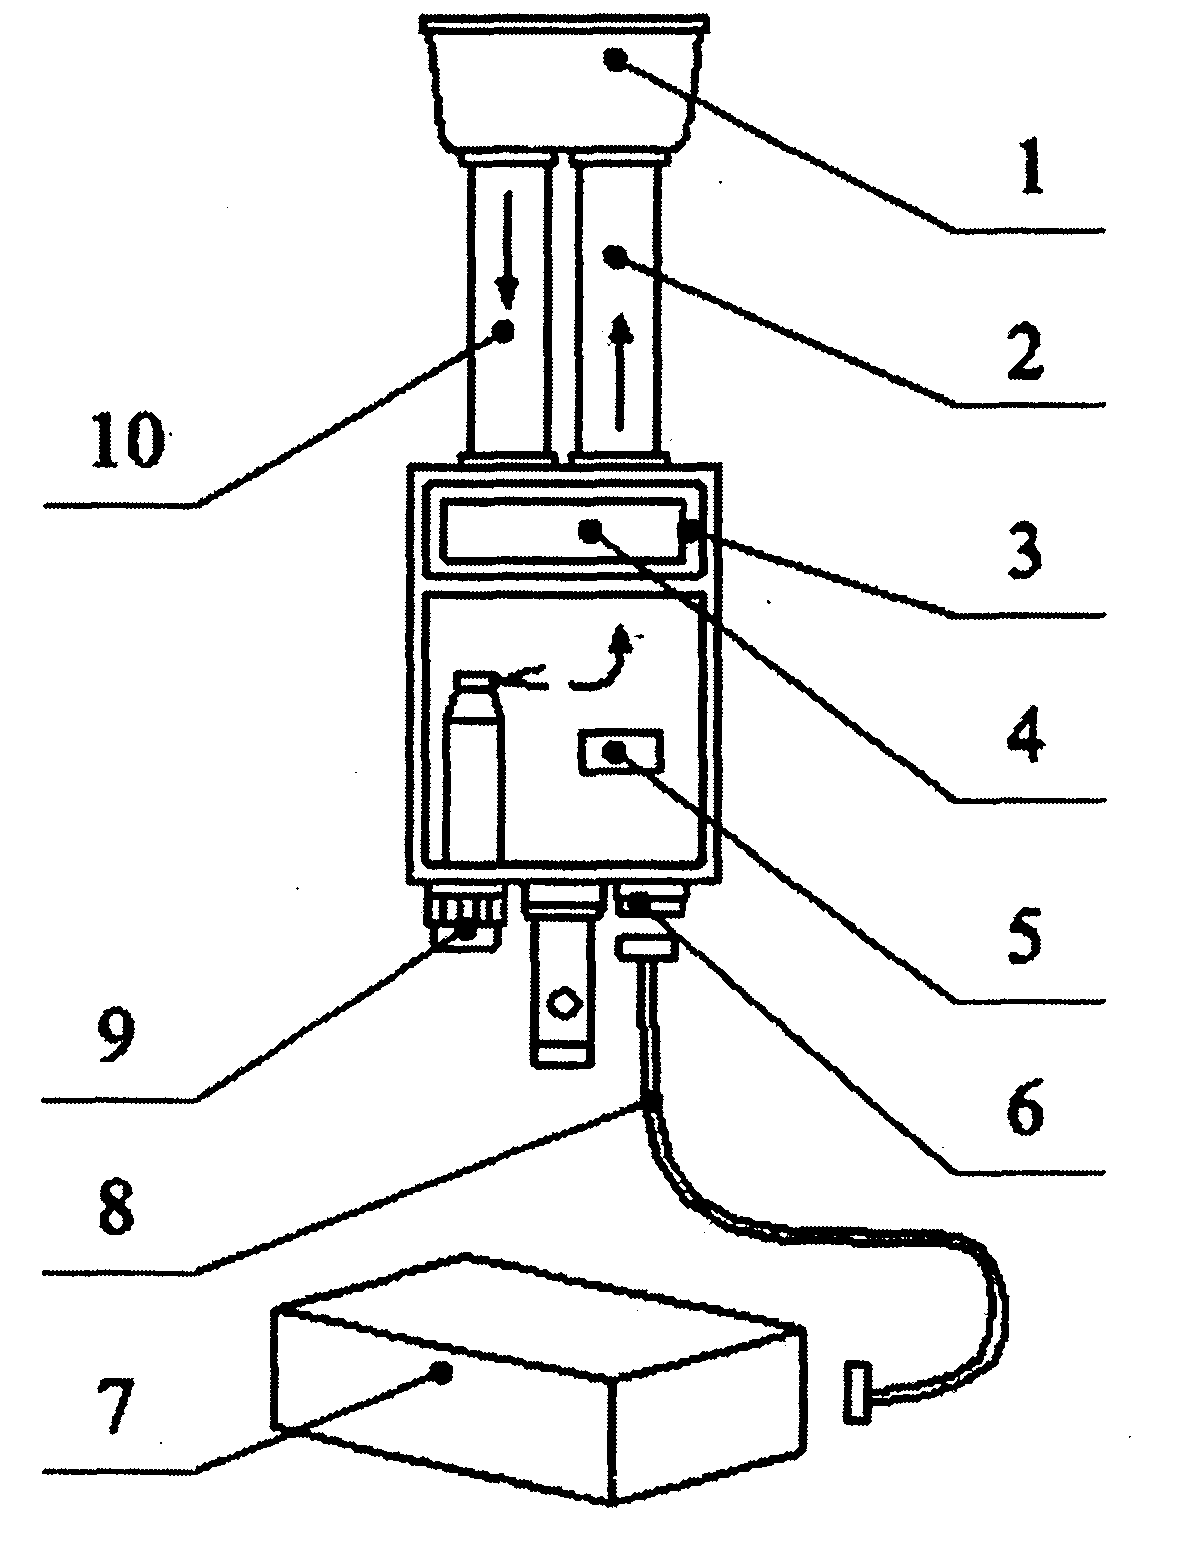 Smoke detector sensitivity detecting device based on obscuration principle